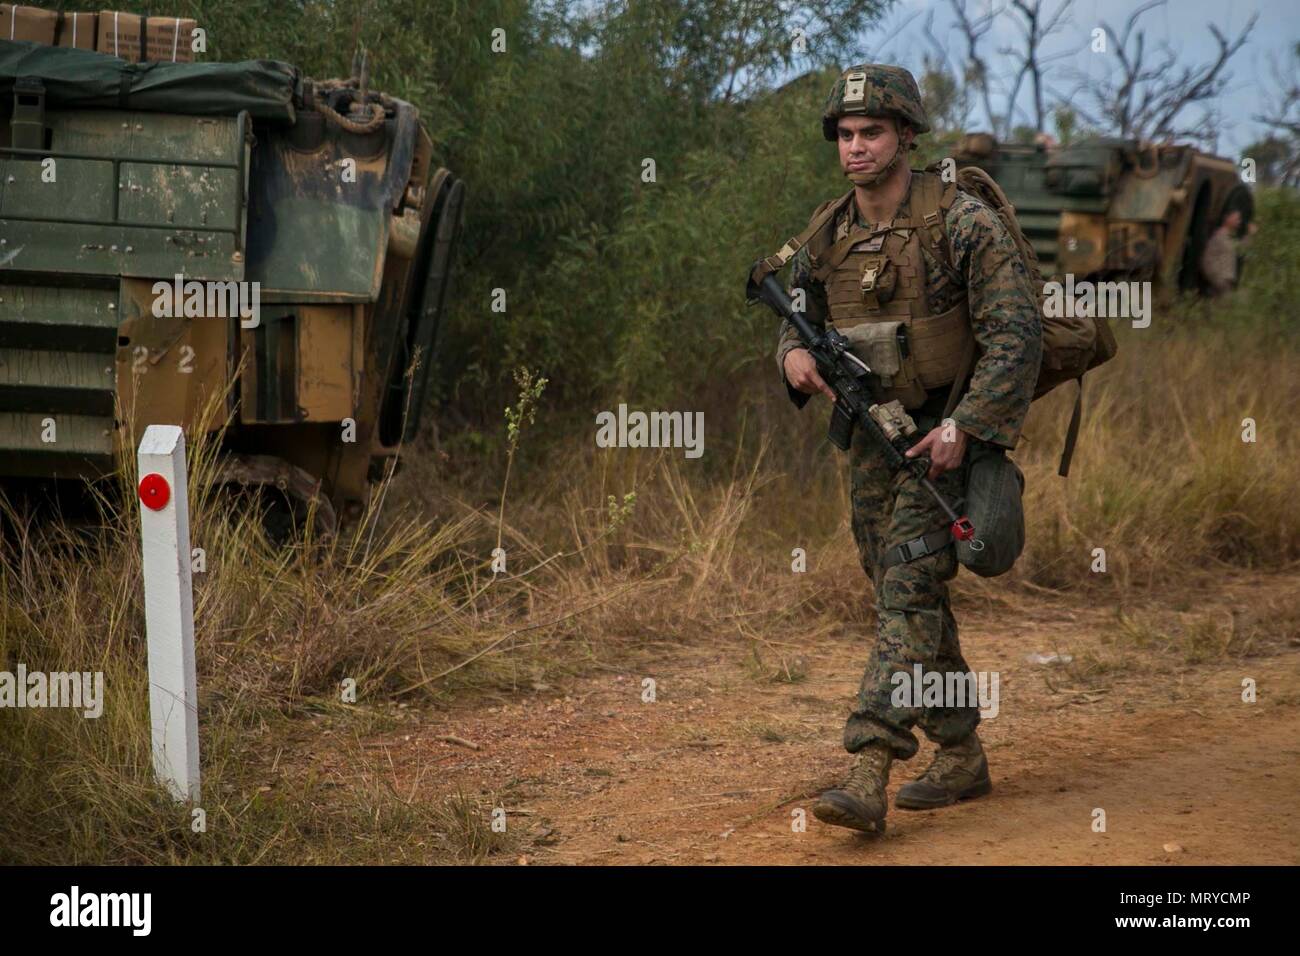 Lance Cpl. Andrew P. Carrera, a mortar man with Weapons Platoon, India Company, Battalion Landing Team, 3rd Battalion, 5th Marines, 31st Marine Expeditionary Unit, patrols through the Australia Defense Force’s Townshend Island Training Area, Queensland, Australia, during Exercise Talisman Saber 17, July 14, 2017. The company’s simulated mission included clearing and securing the training area. India Company is the mechanized raid company for the 31st MEU, currently supporting Talisman Saber 17 while deployed on its scheduled patrol of the Indo-Asia-Pacific region. Talisman Saber is a biennial  Stock Photo